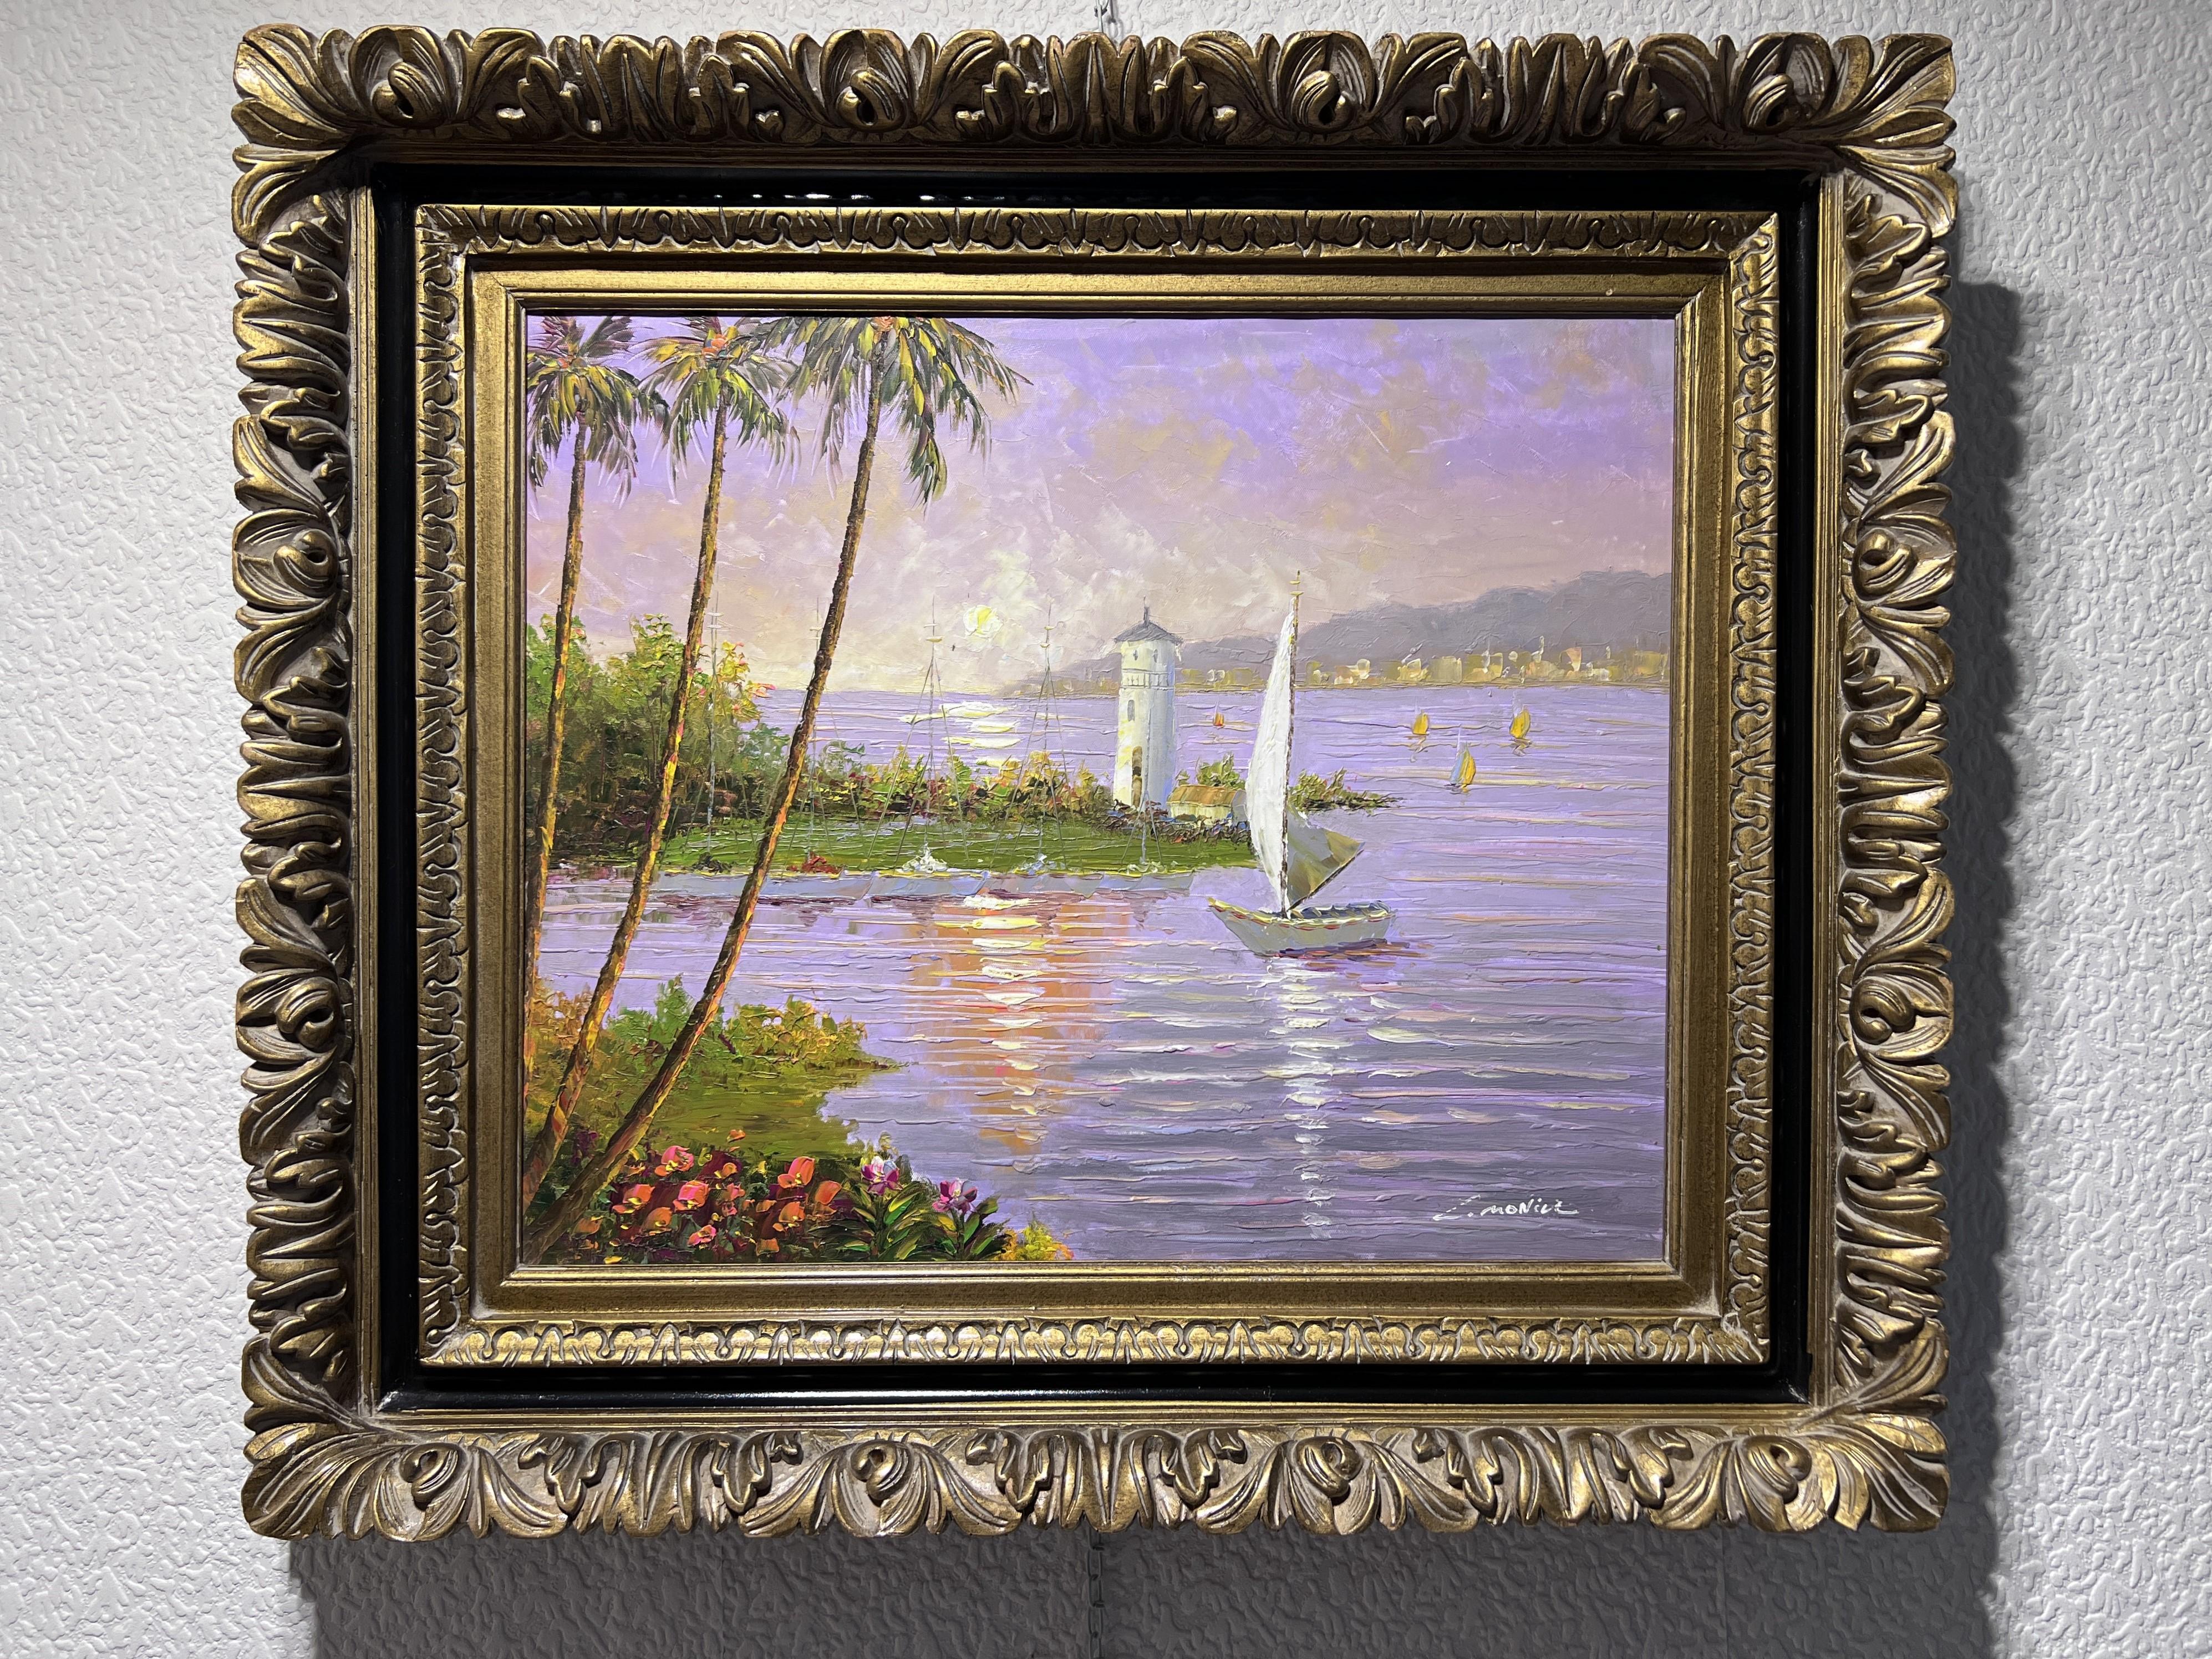 Up for sale is a beautiful antique original oil painting on canvas depicting a seascape with a boat, lighthouse, and harbor view at sunset. 
Illegible signed in a lower-right corner.
Presented in a gorgeous ornate frame.
Condition: The painting is